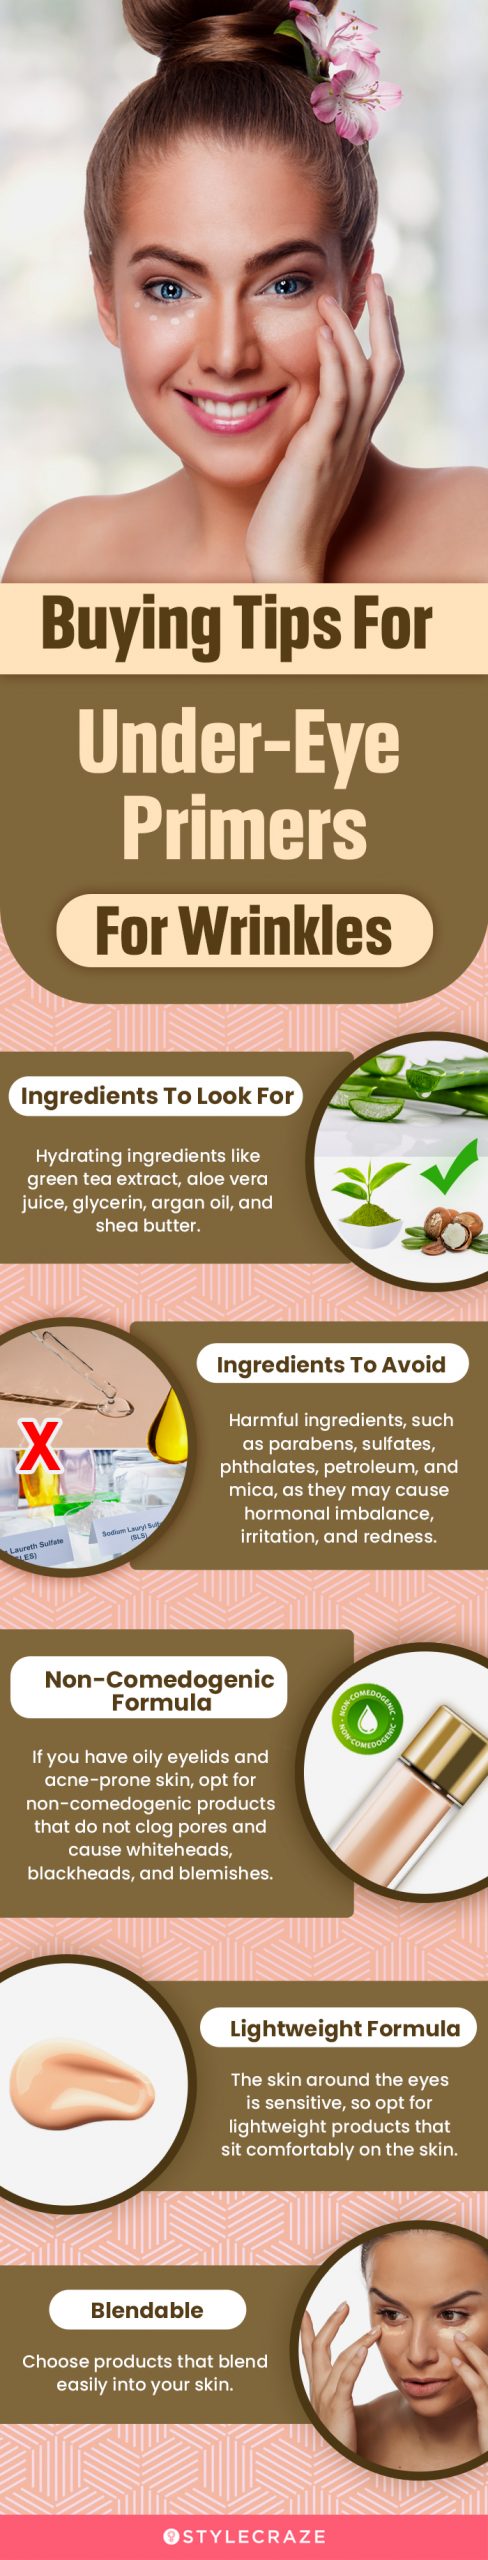 Buying Tips For Under-Eye Primers For Wrinkles (infographic)